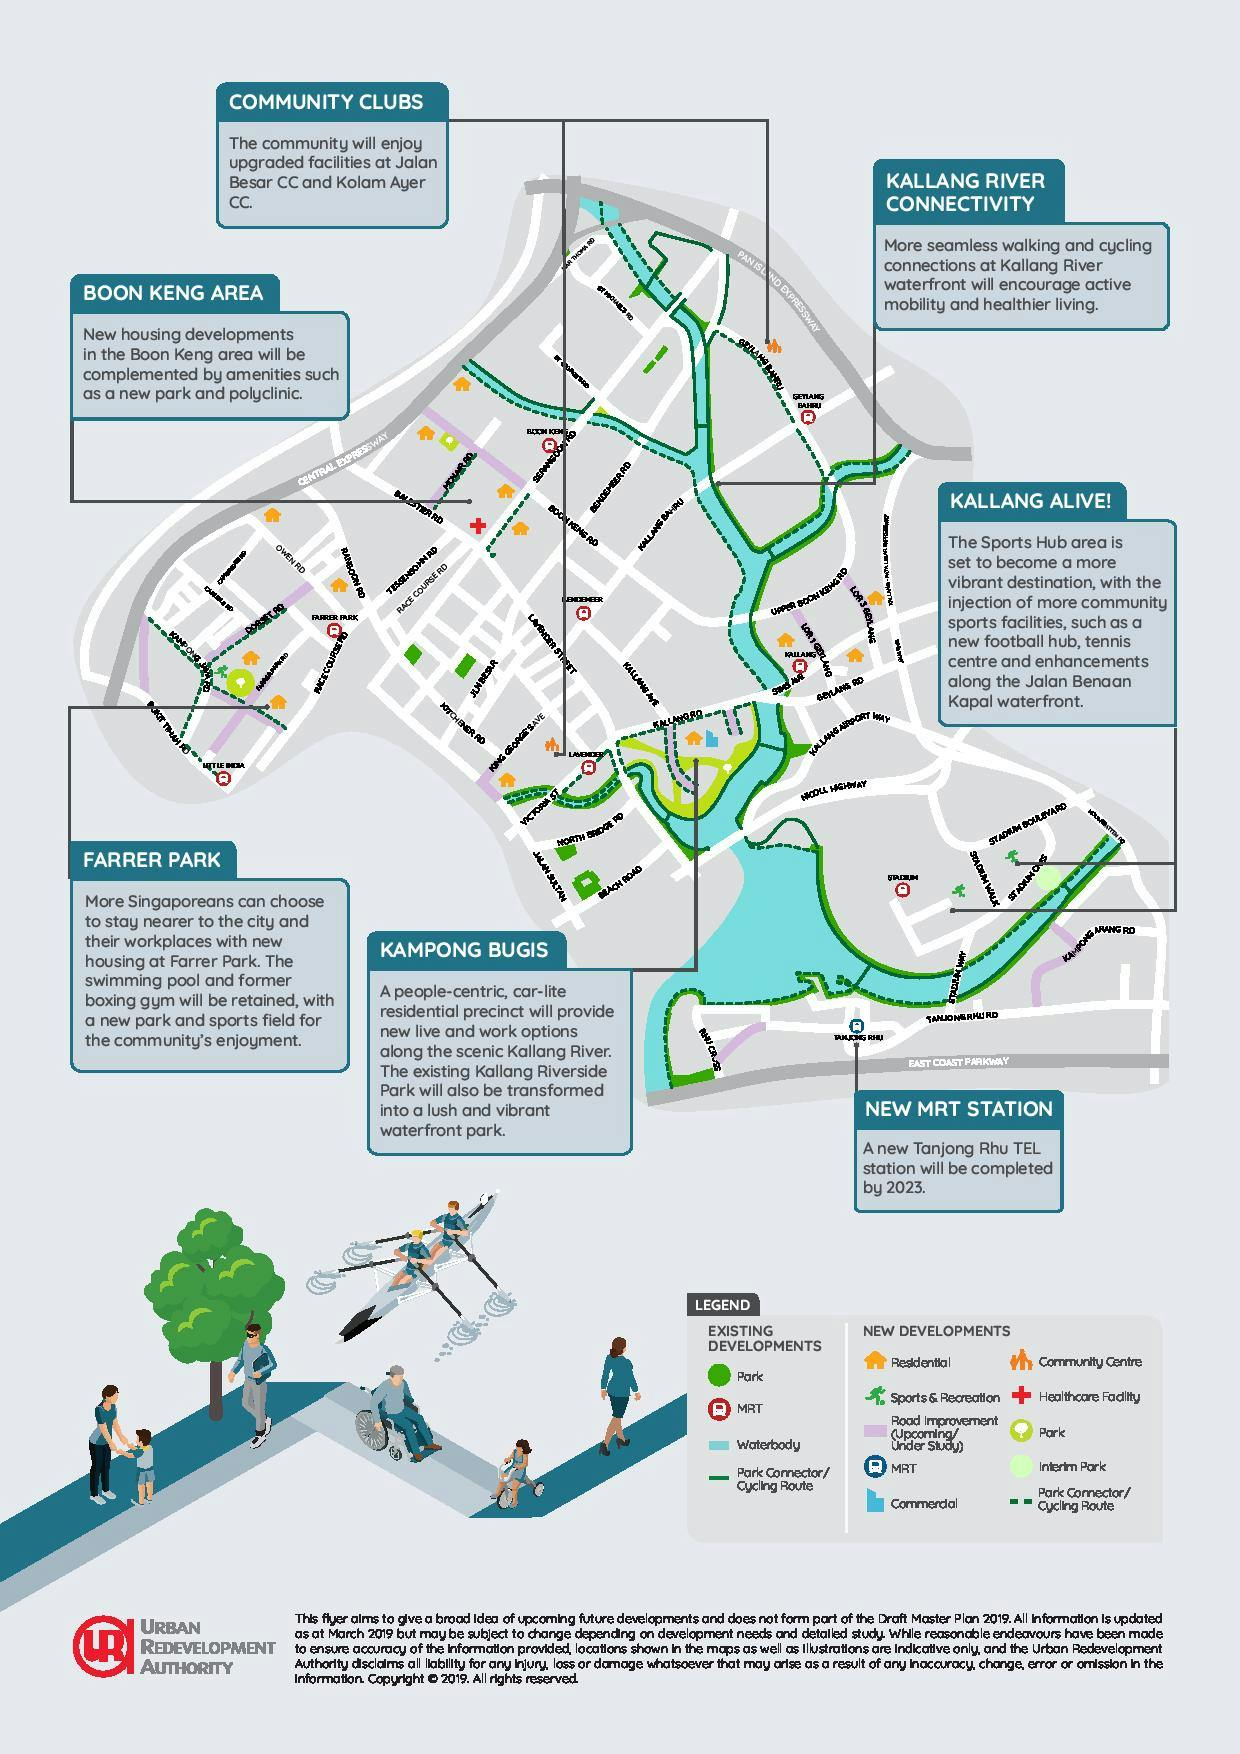 The Kallang URA Masterplan's revitalisation of the area, that Zyanya is positioned to benefit from